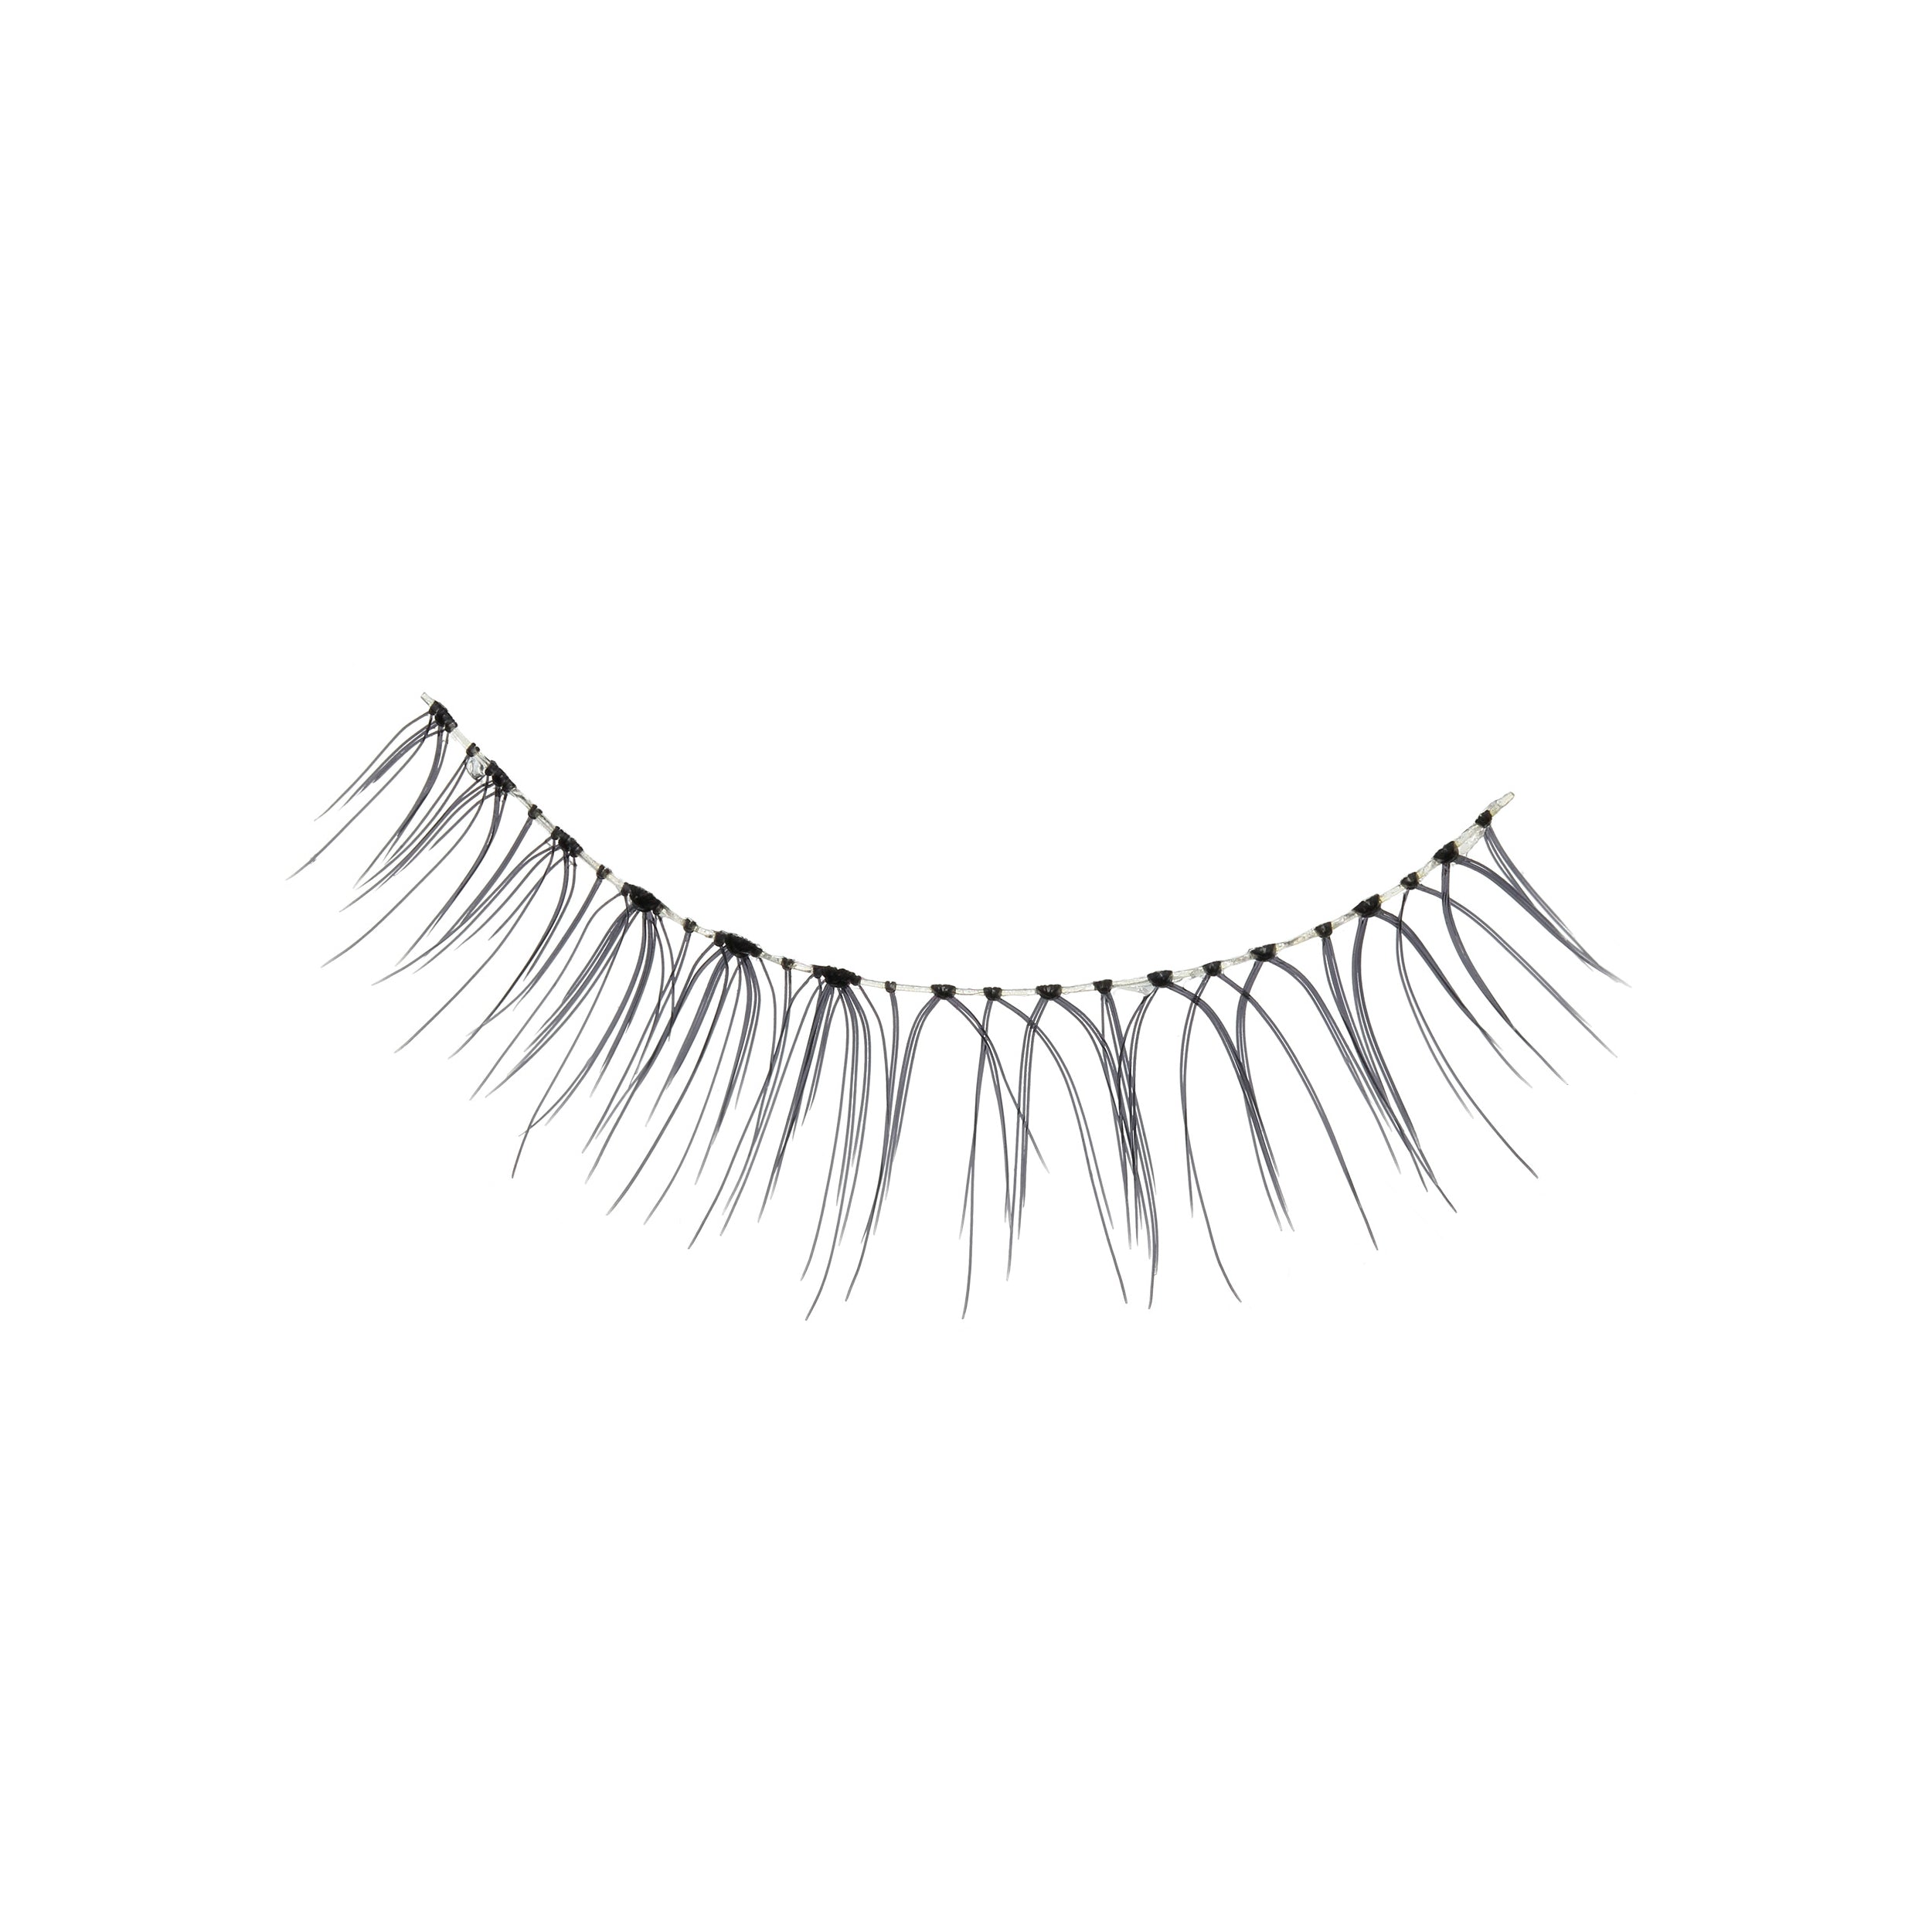 DUP Bloomin' Eyelashes Pure Nude 02 Beauty D-UP   